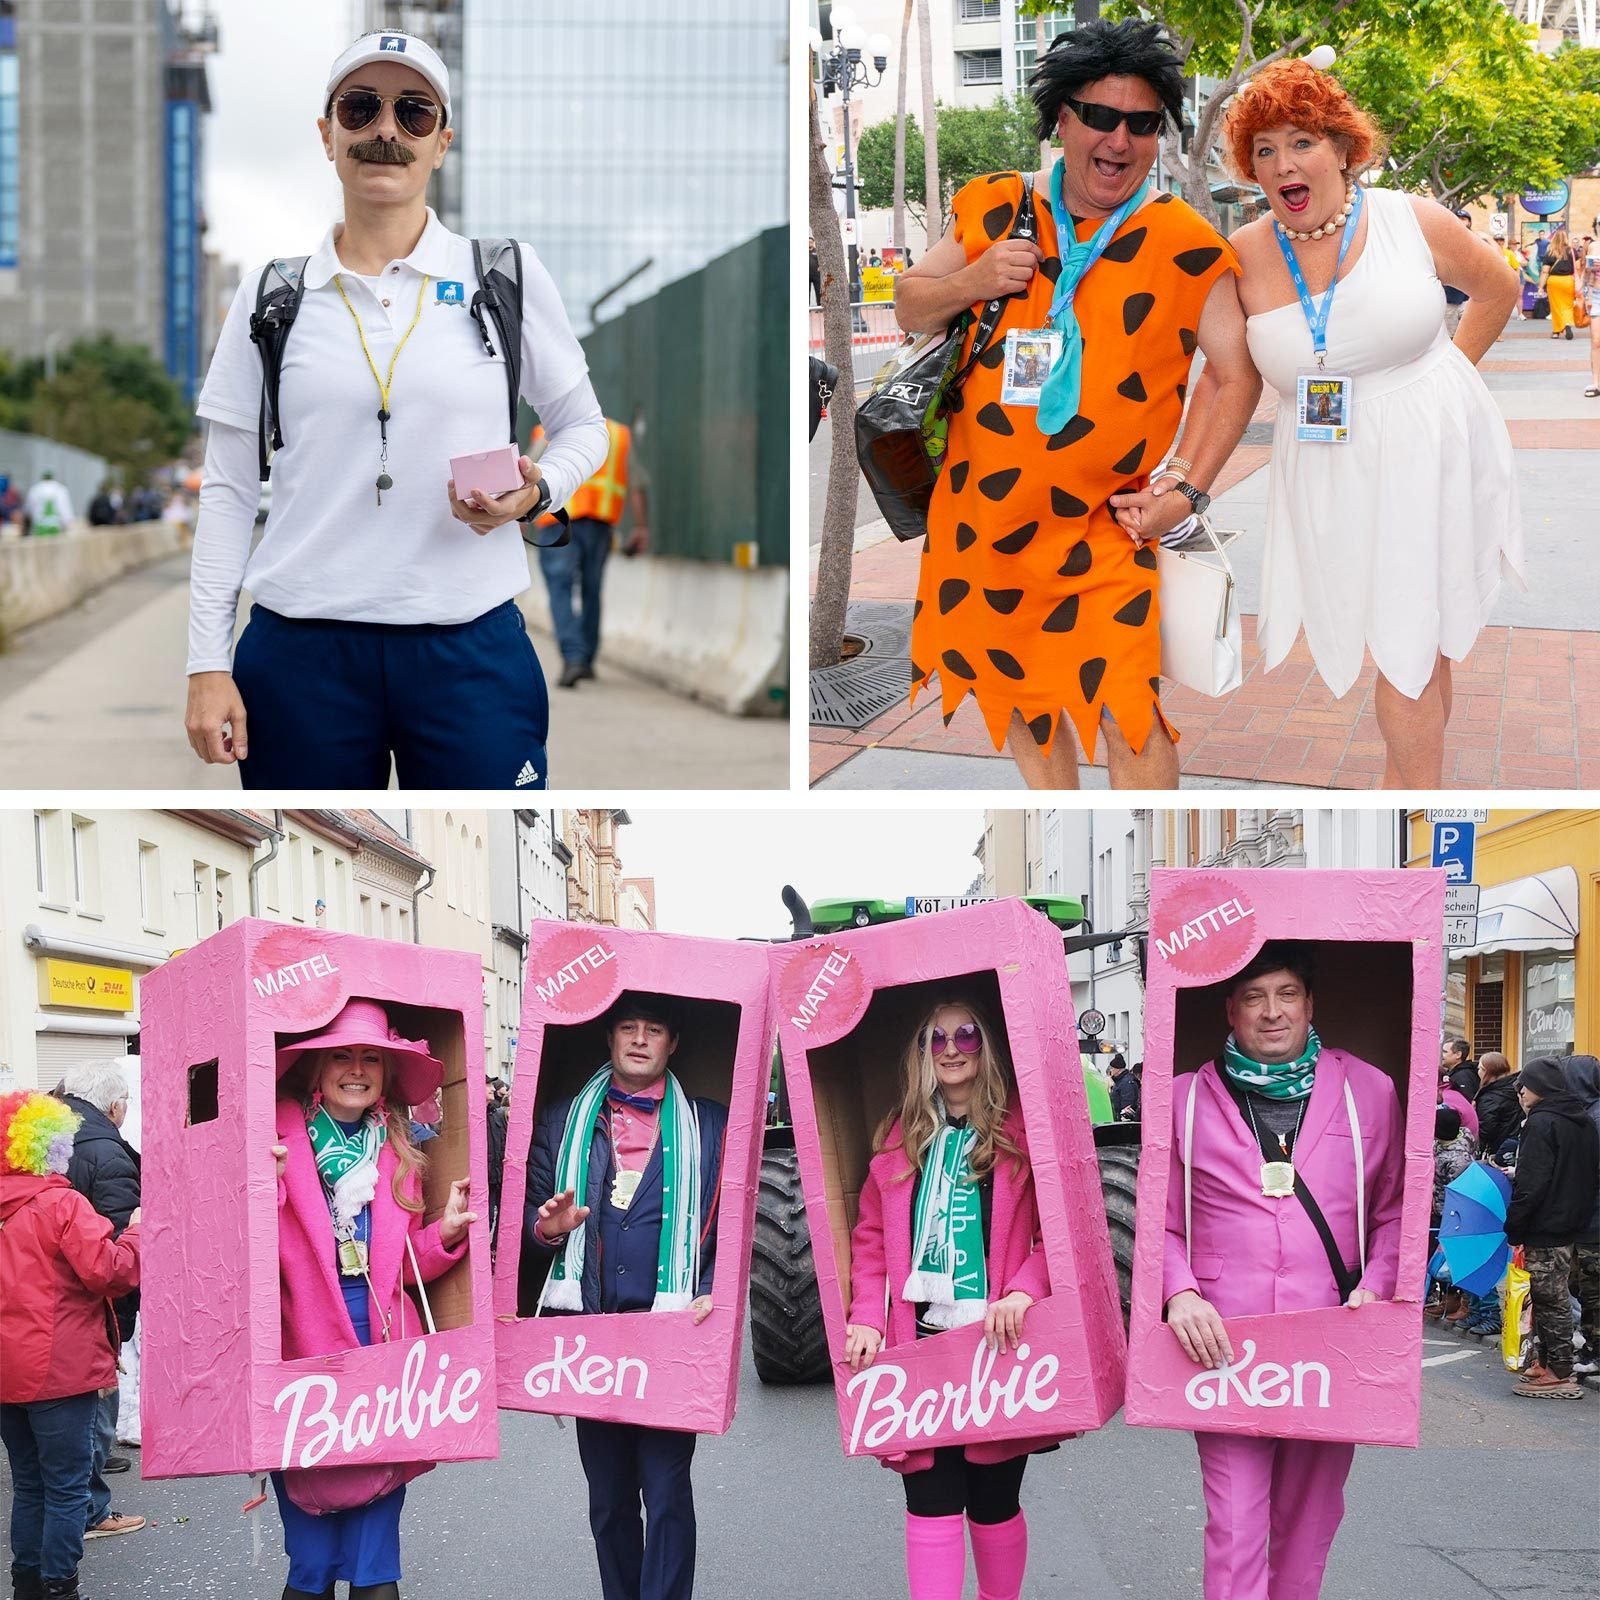 83 Best Group Halloween Costumes to Wear with Your Friends This Year